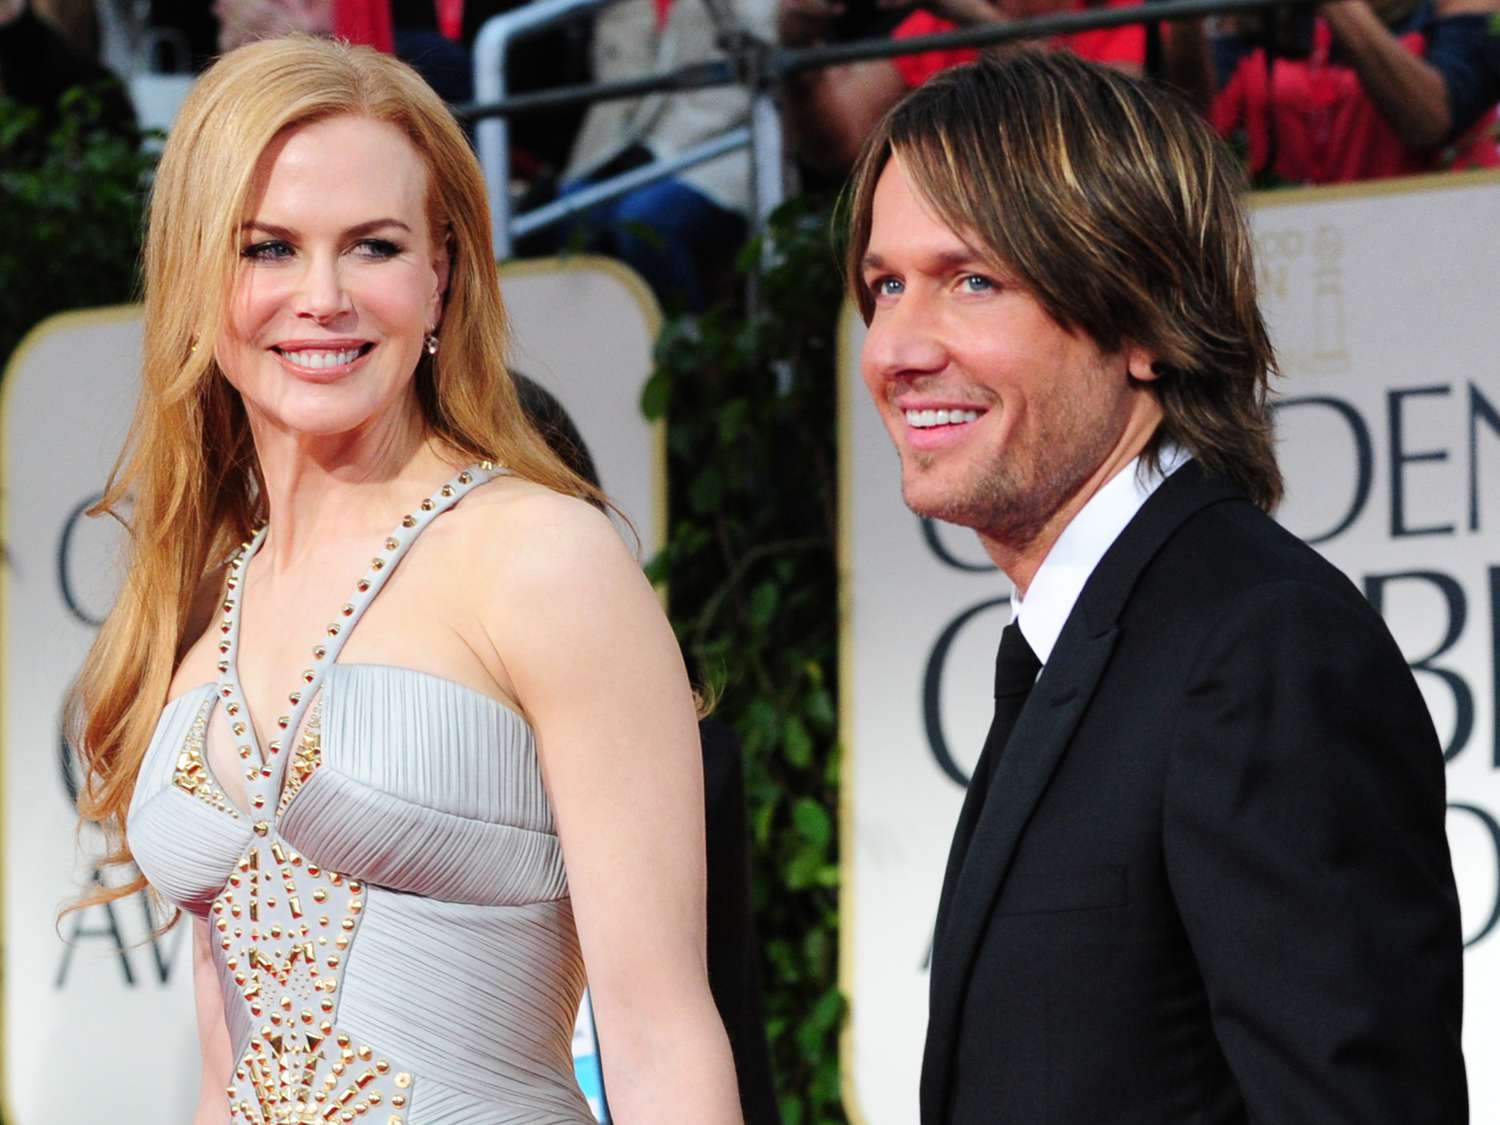 Nicole Kidman arrives with husband Keith Urban on the red carpet for the 69th annual Golden Globe Awards at the Beverly Hilton Hotel in Beverly Hills, California, January 15, 2012